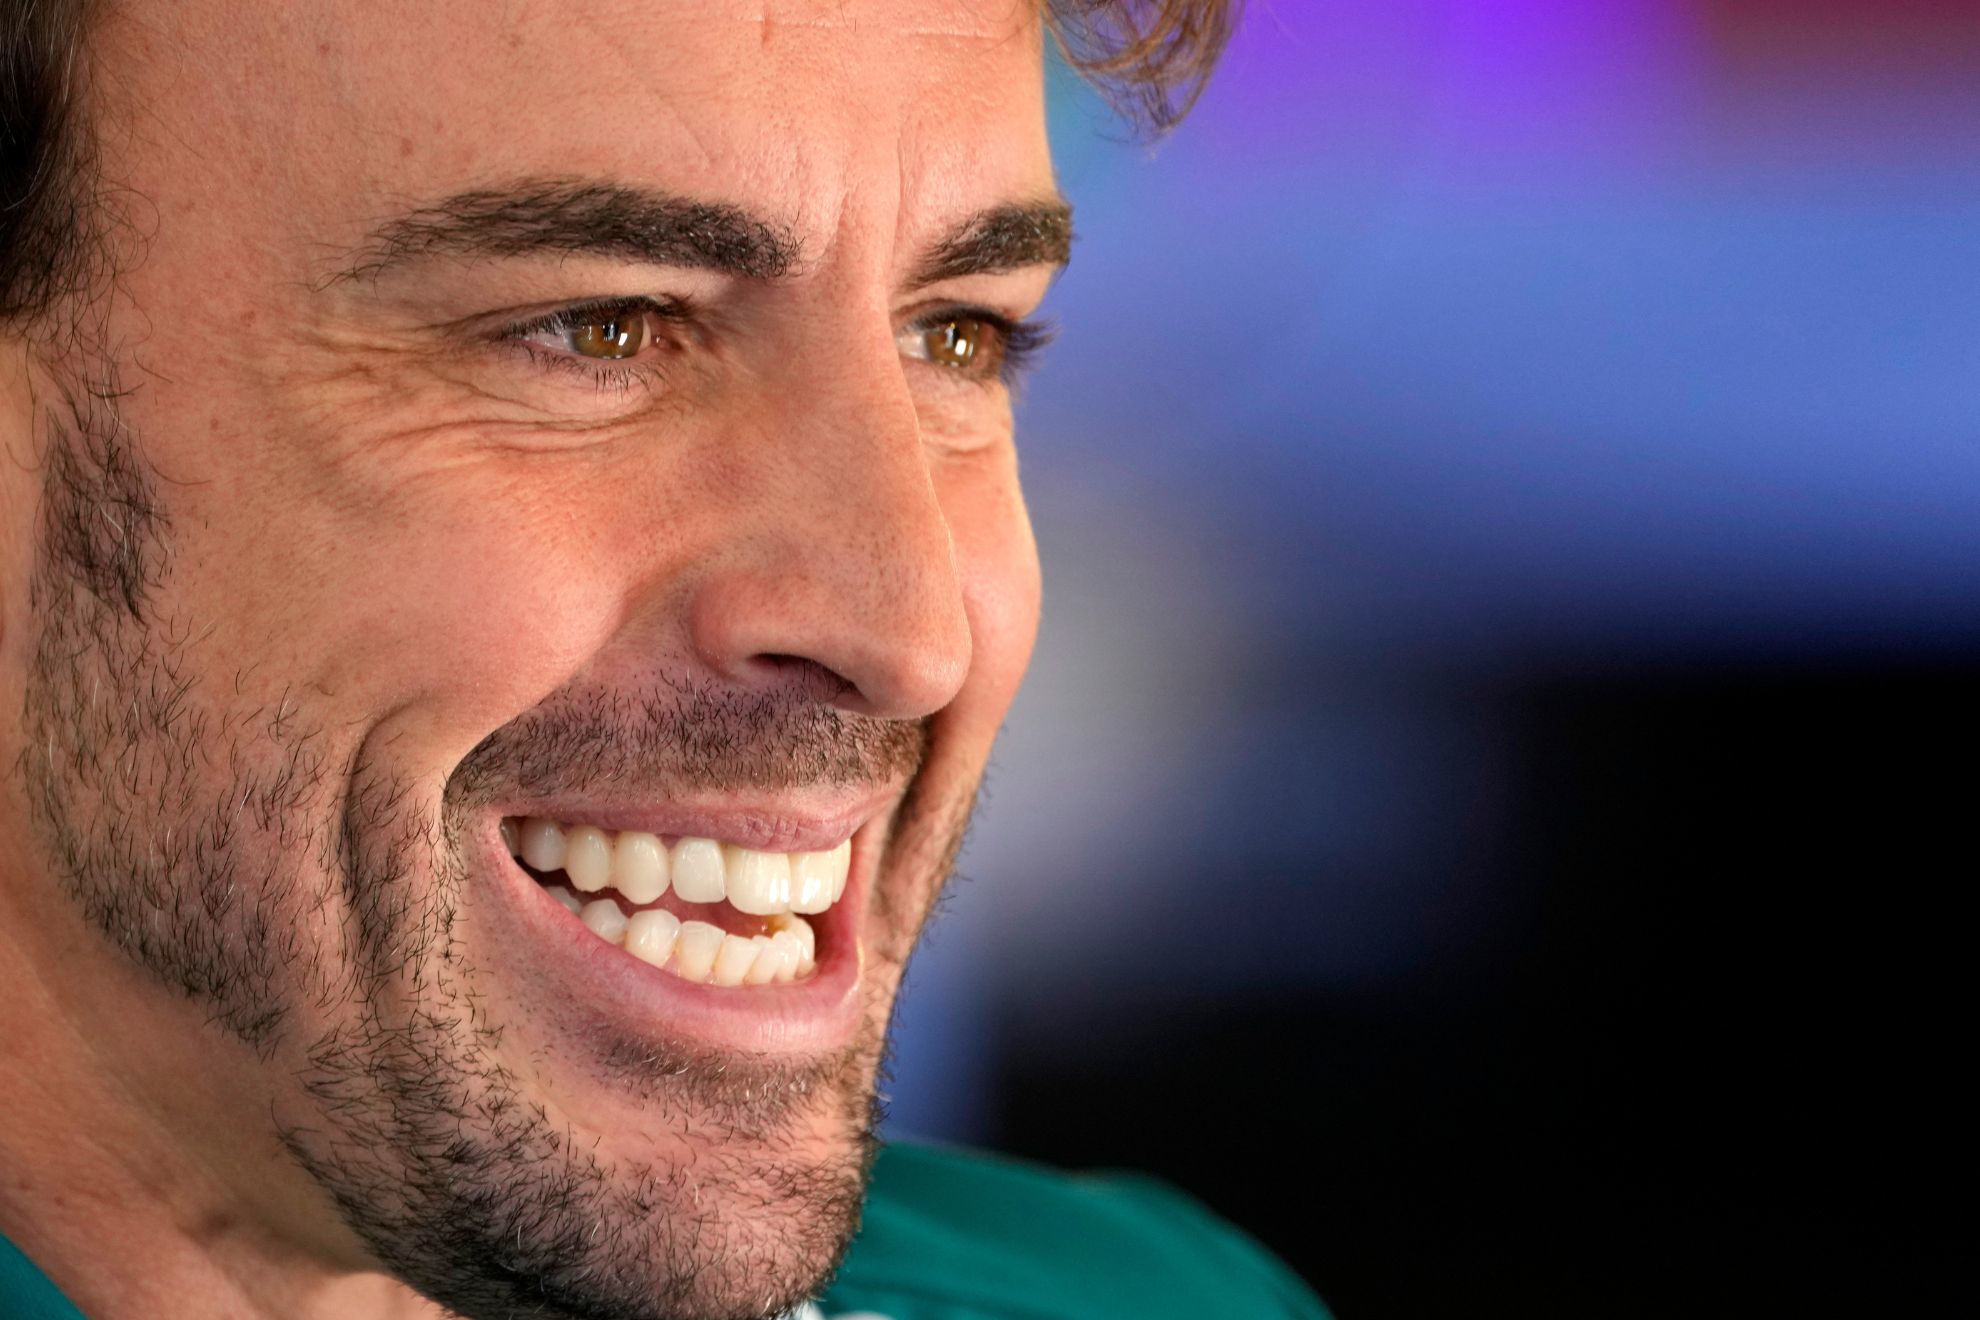 Fernando Alonso is having too much fun with the Taylor Swift dating rumors